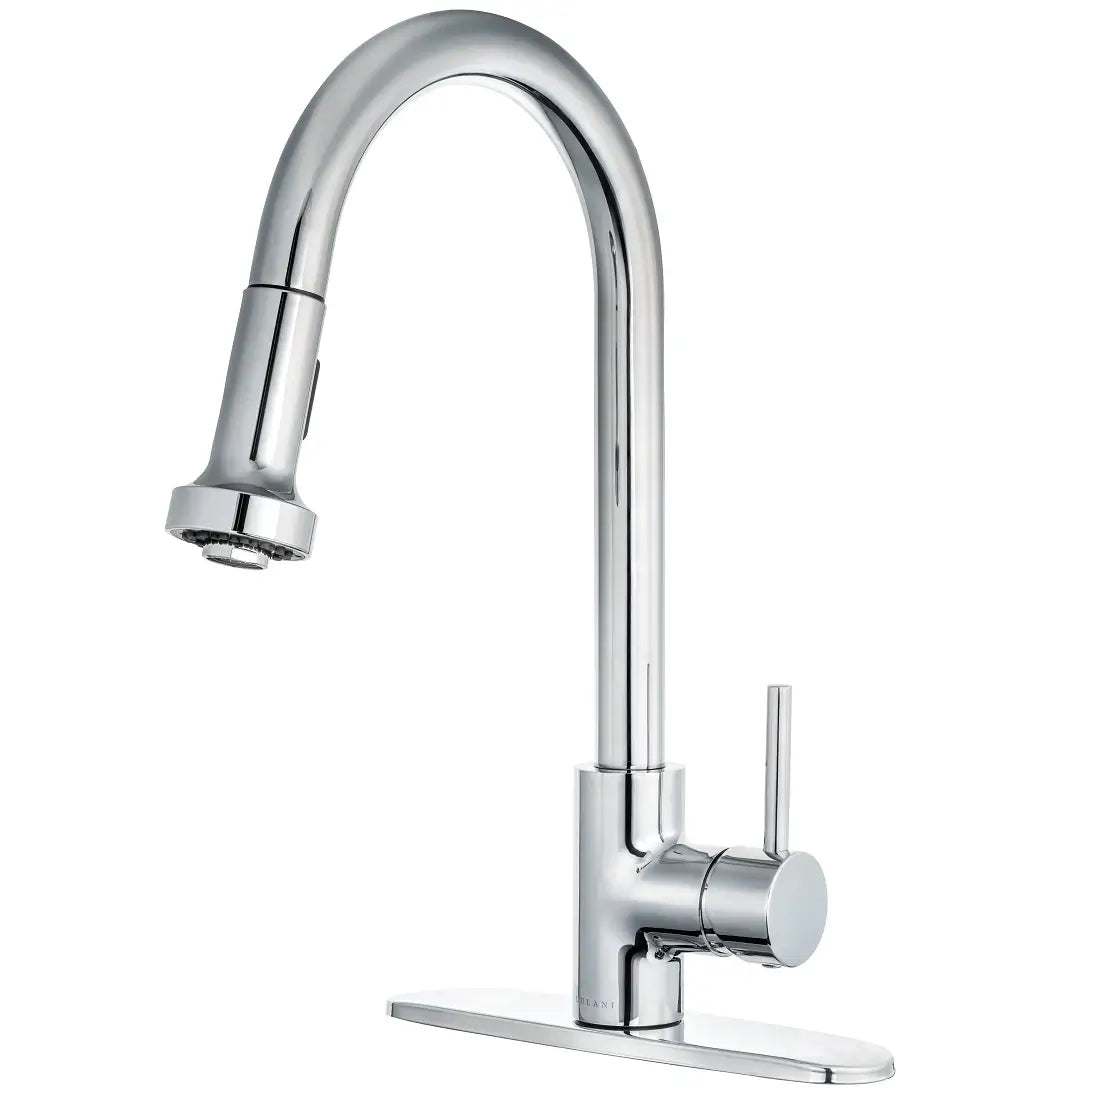 Lulani St. Lucia Chrome 1.8 GPM 360-Degree Swivel Spout Pull-Down Faucet